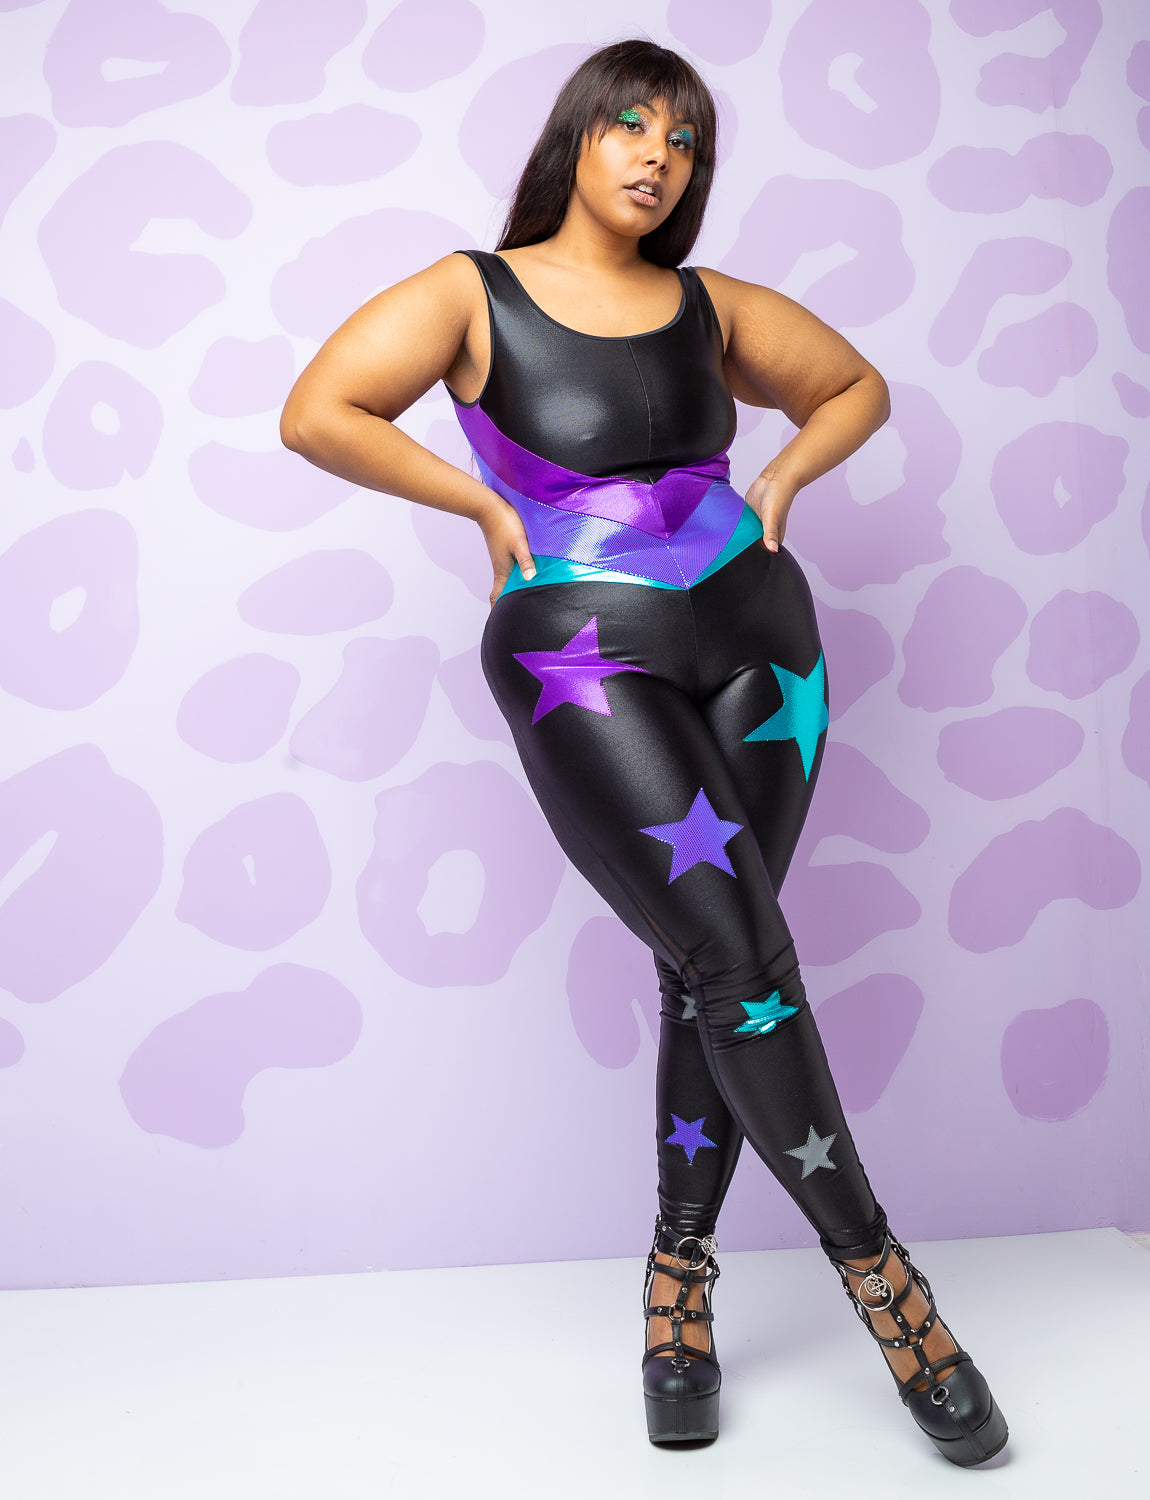 woman wearing black catsuit with purple and turquoise stars on the legs and panels on the body